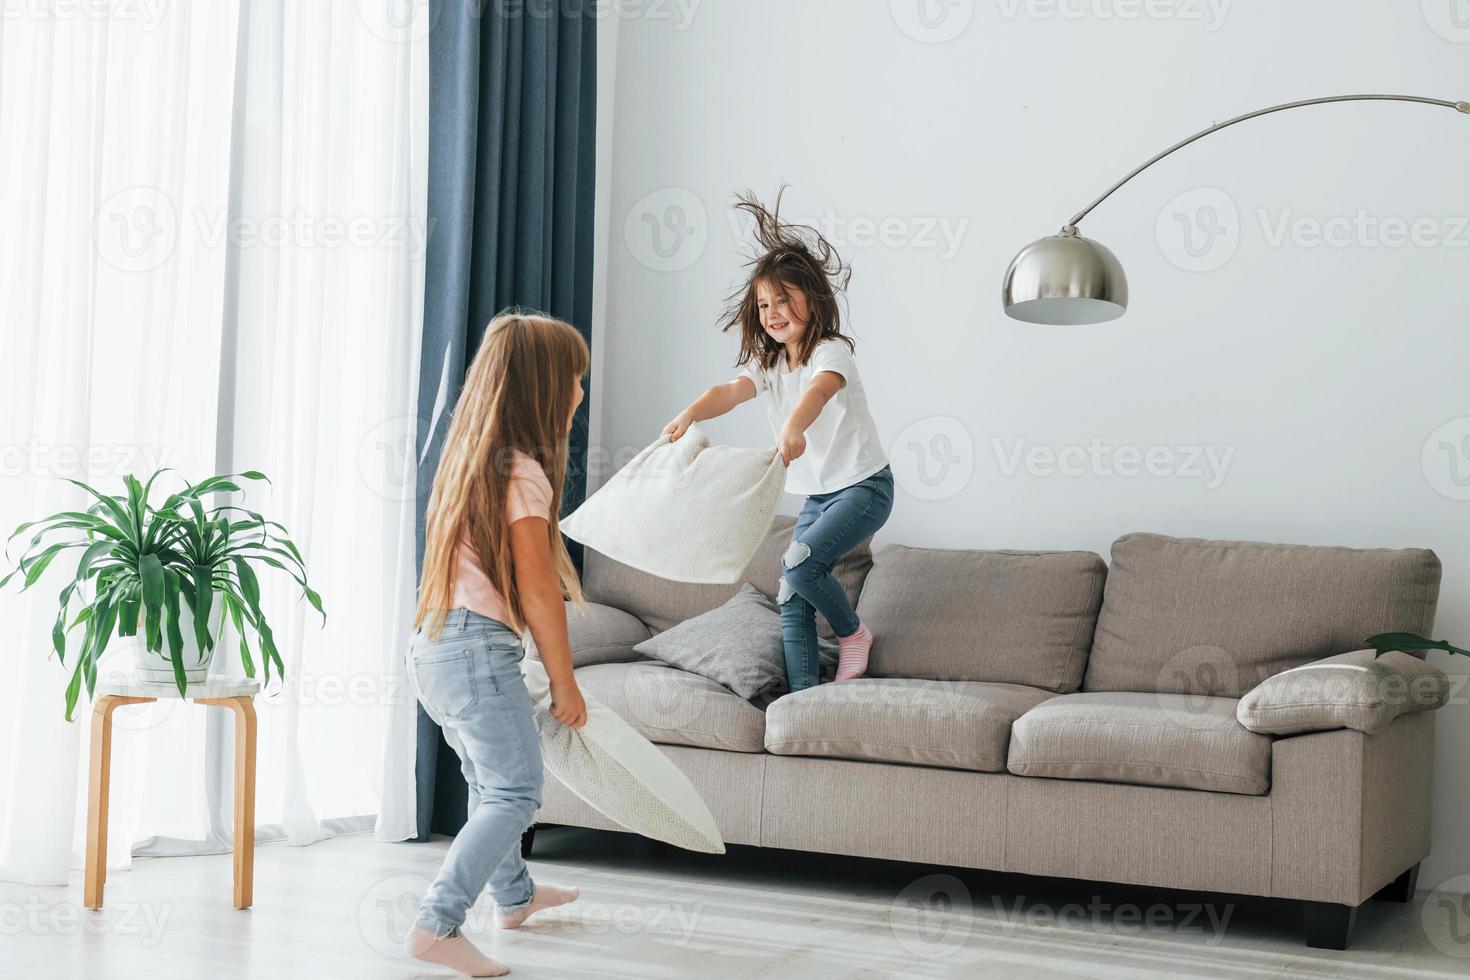 Running with pillows. Kids having fun in the domestic room at daytime together photo